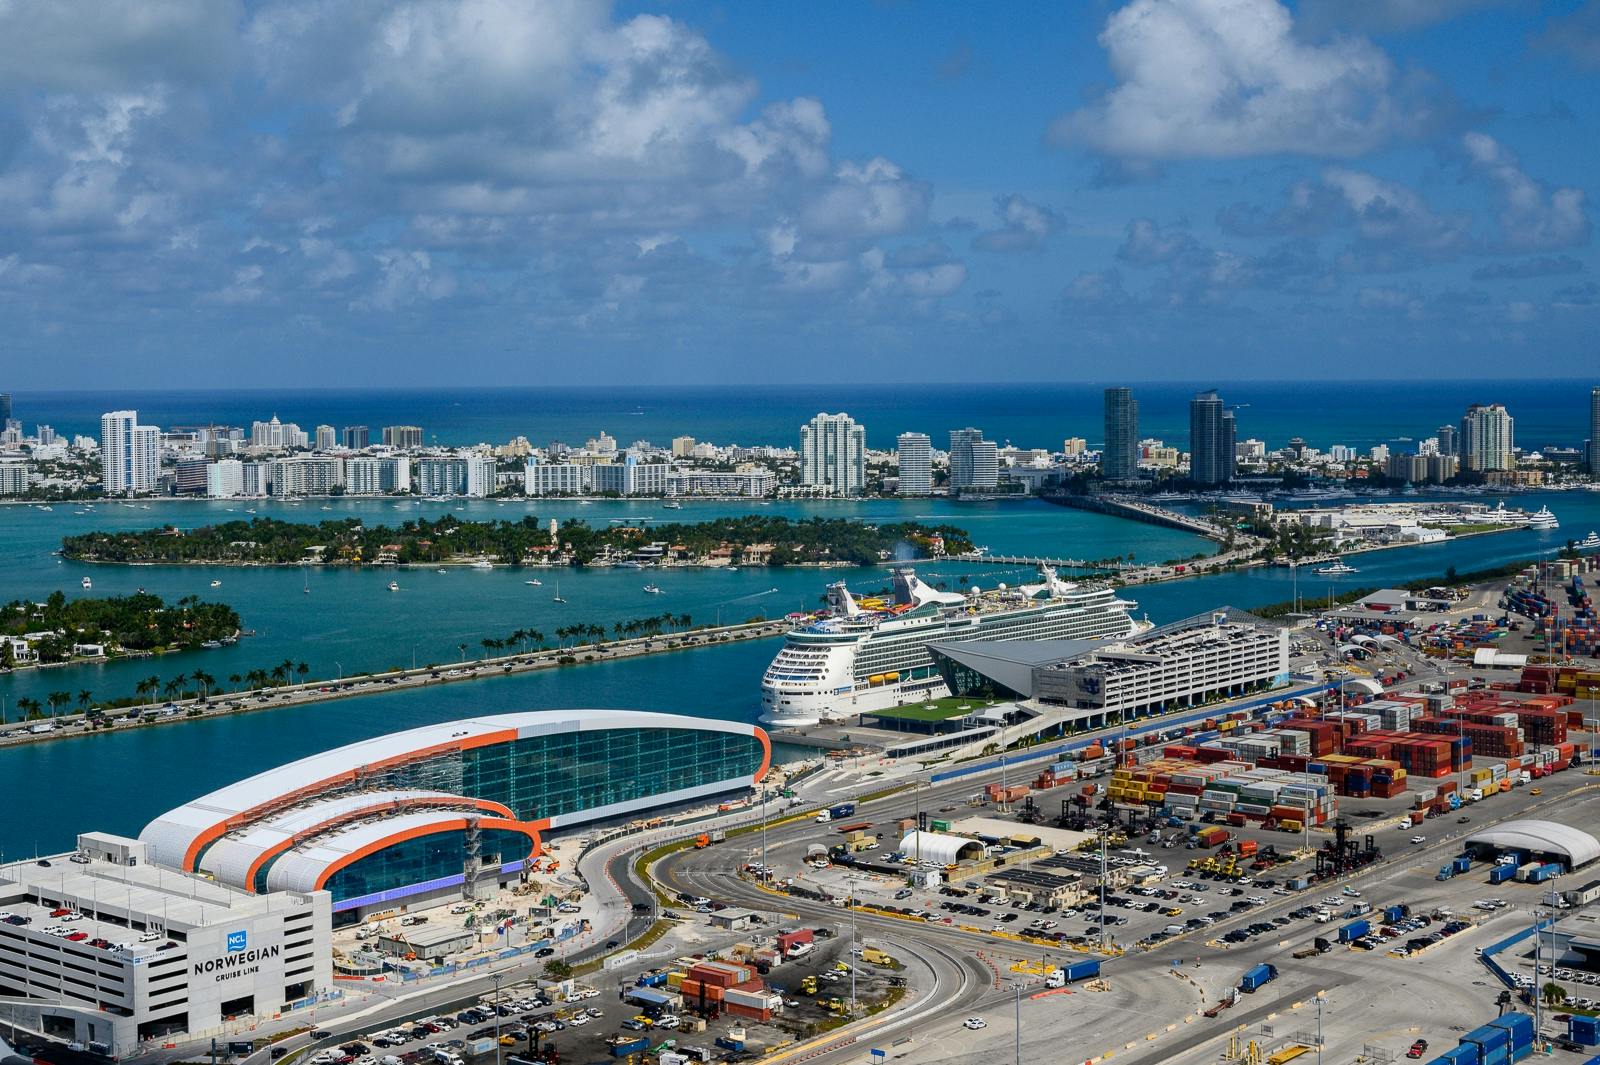 Ocean and city views 1 hour helicopter tour from Fort Lauderdale